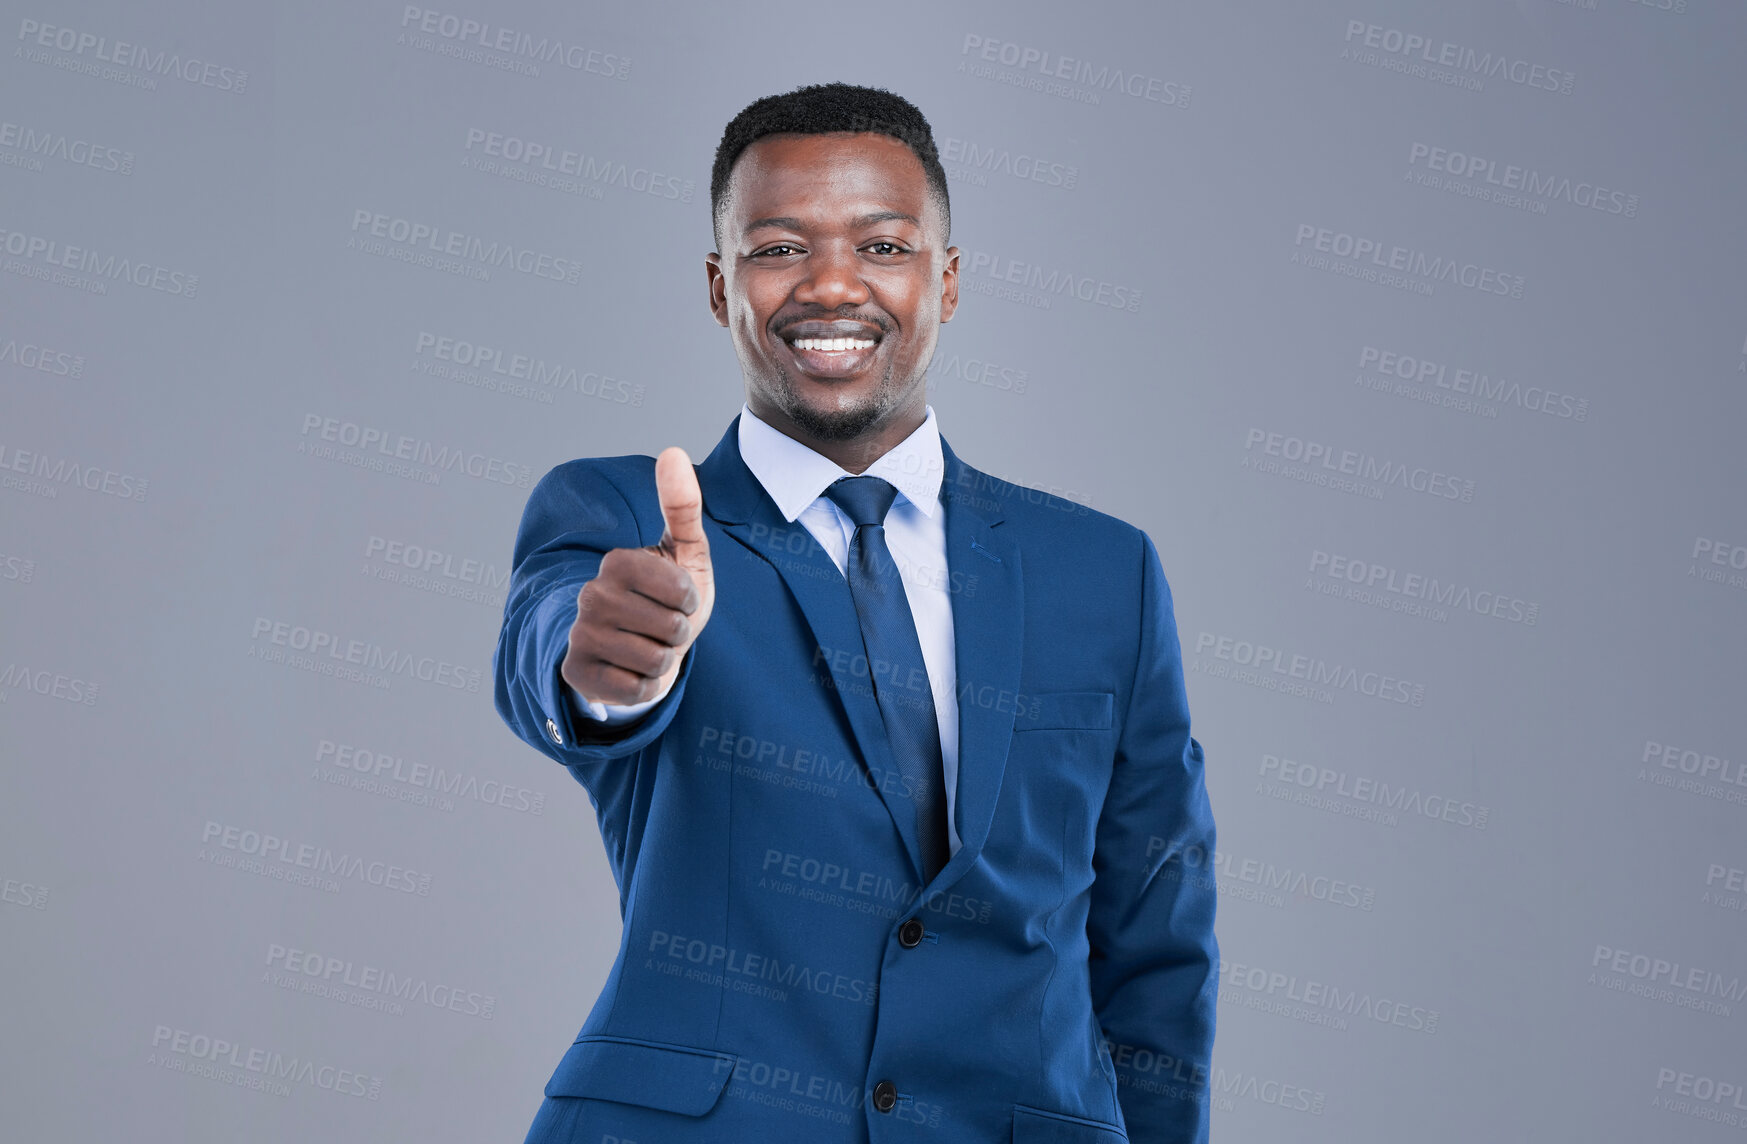 Buy stock photo Cropped portrait of a handsome young businessman giving you a thumbs up in studio against a grey background